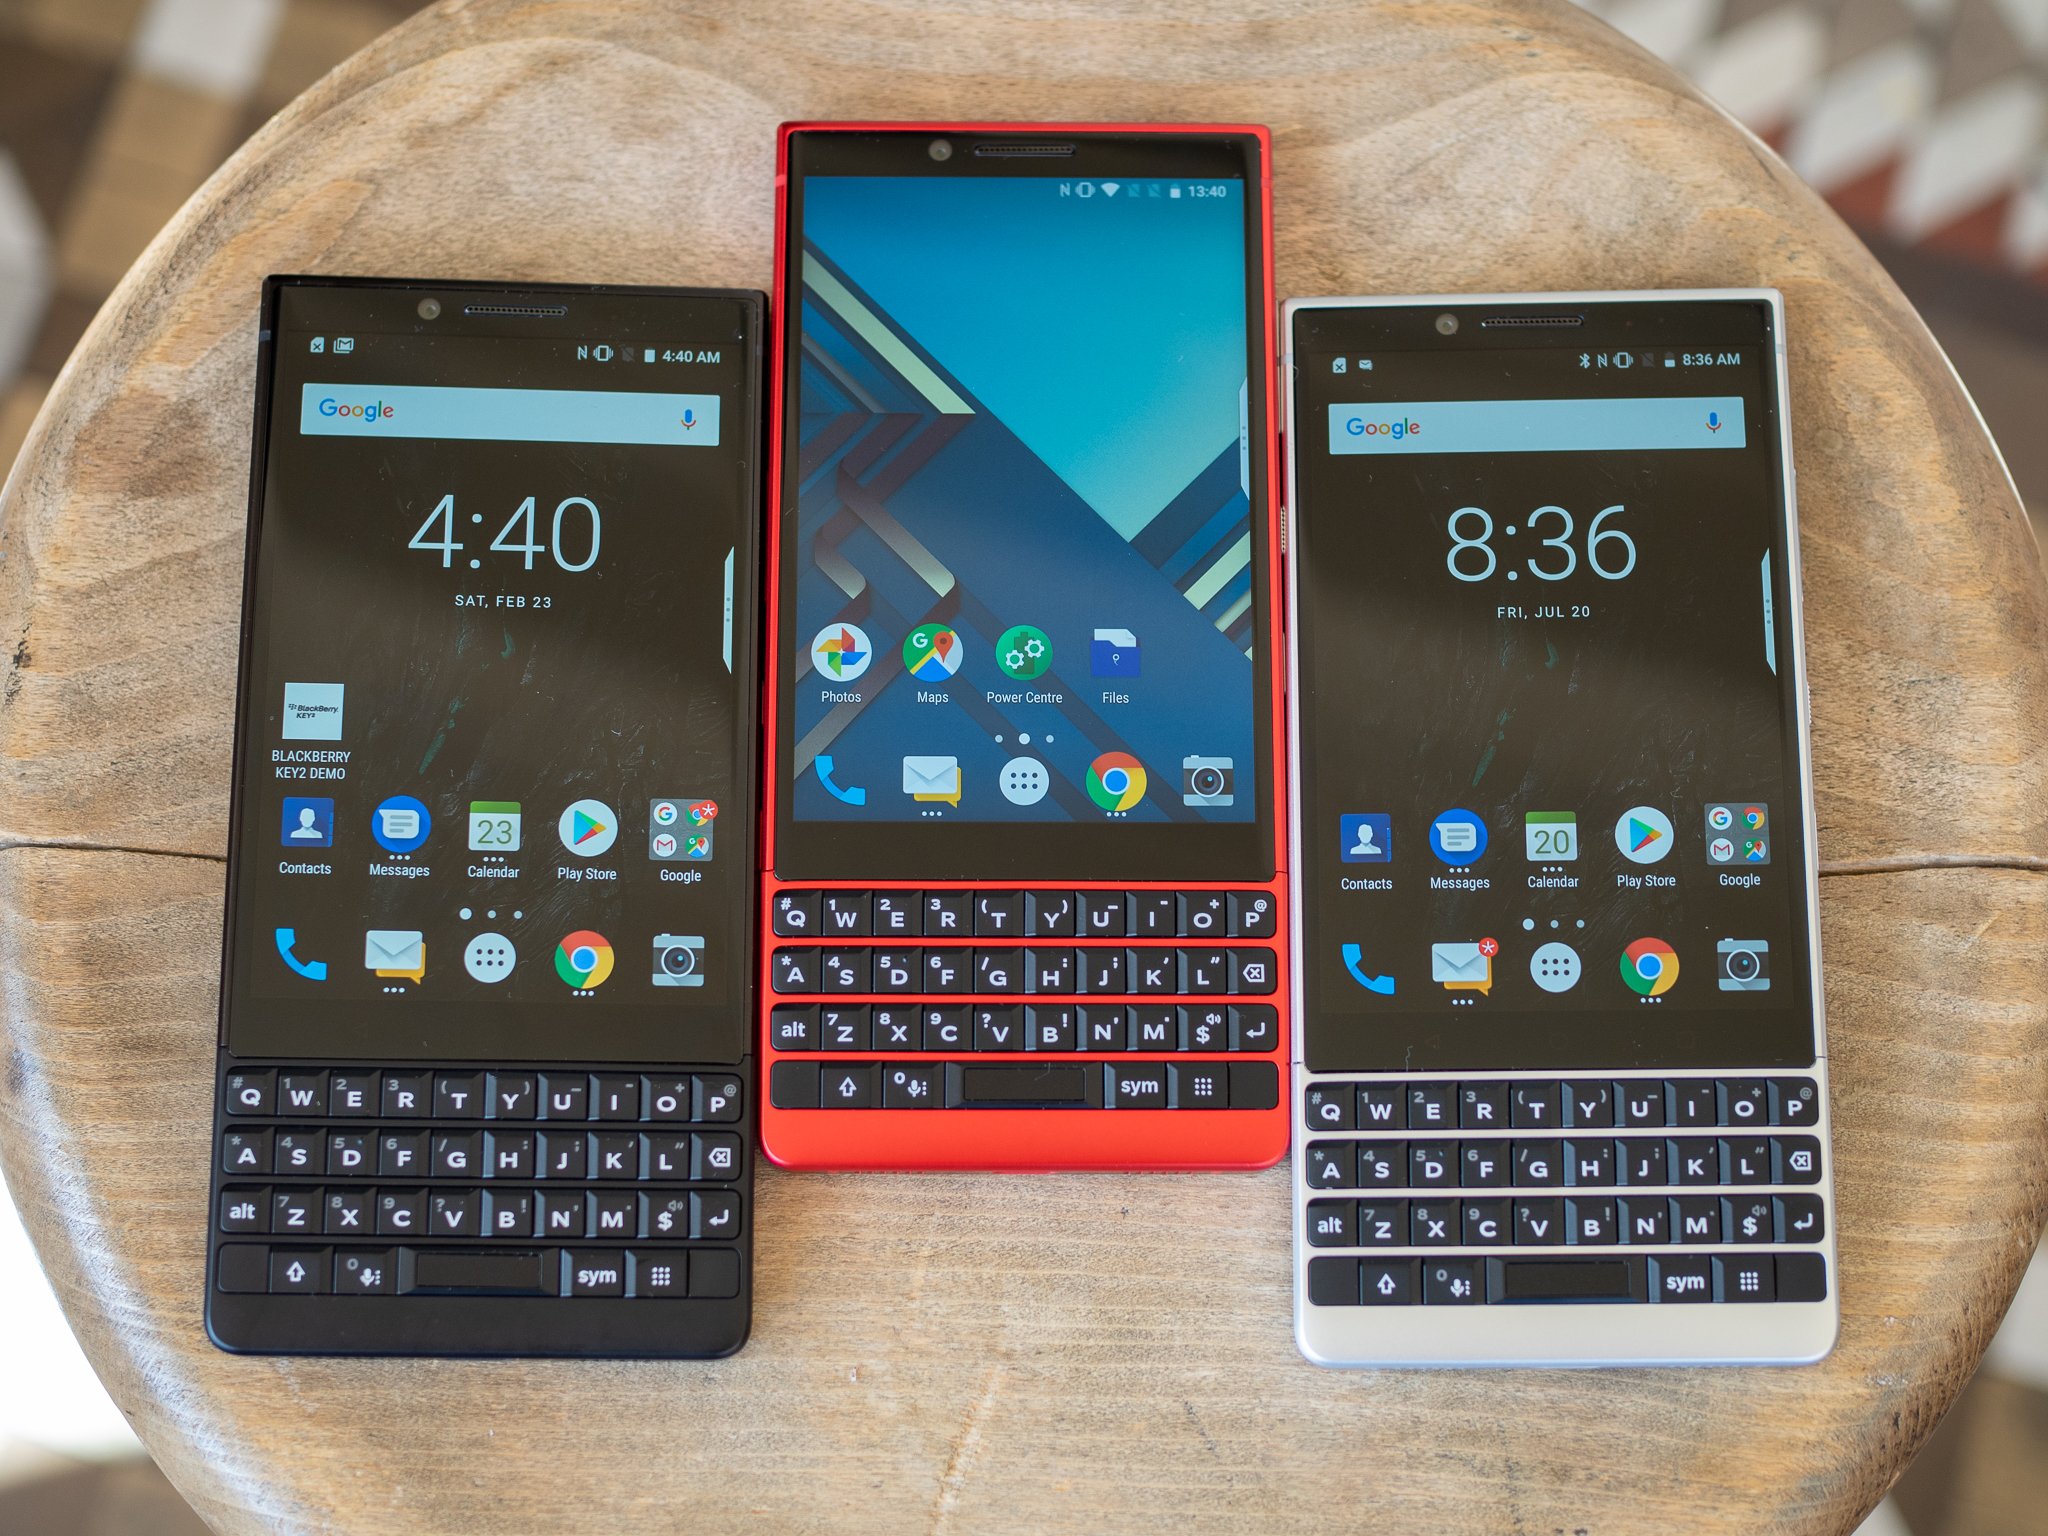 The upcoming QWERTY BlackBerry 5G smartphone might have one killer feature